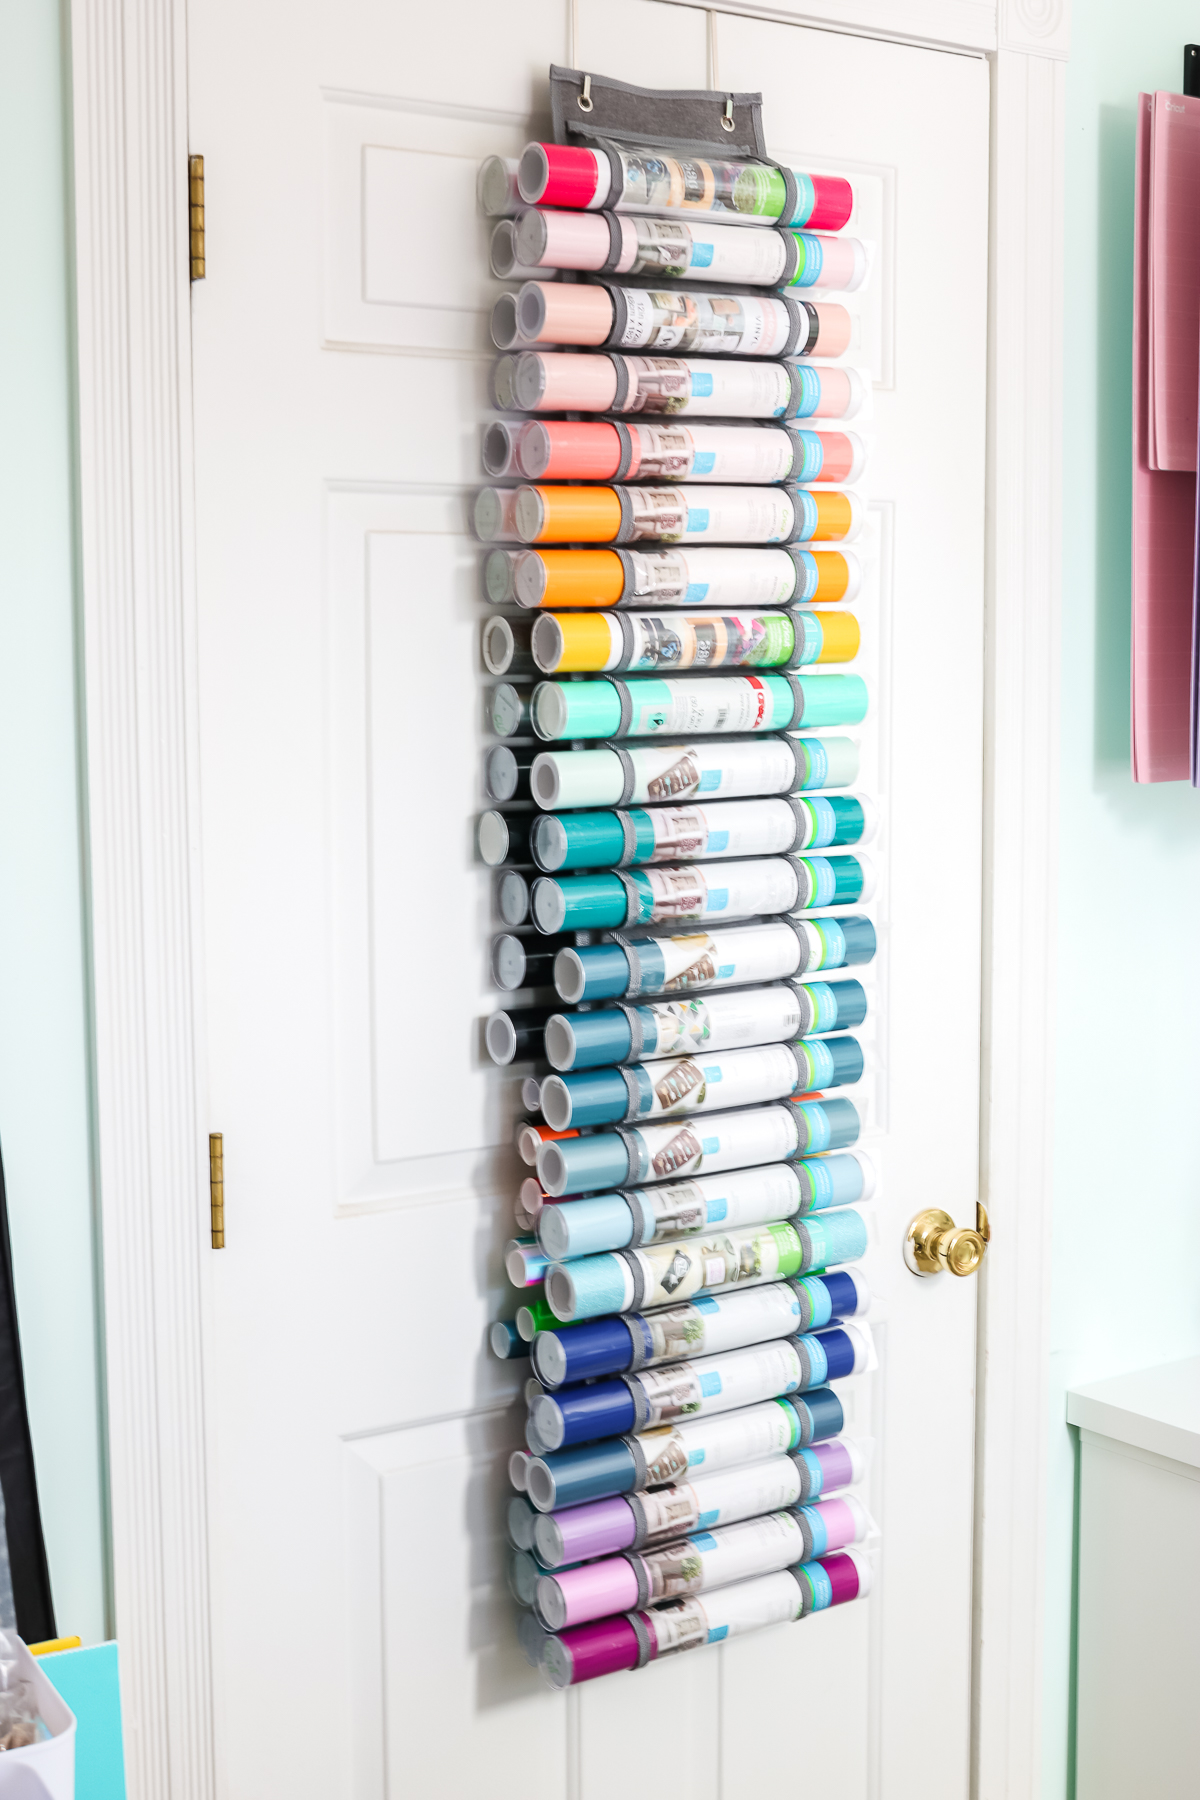 Organization Made Easy with Cricut and Smart Vinyl - Southern Couture